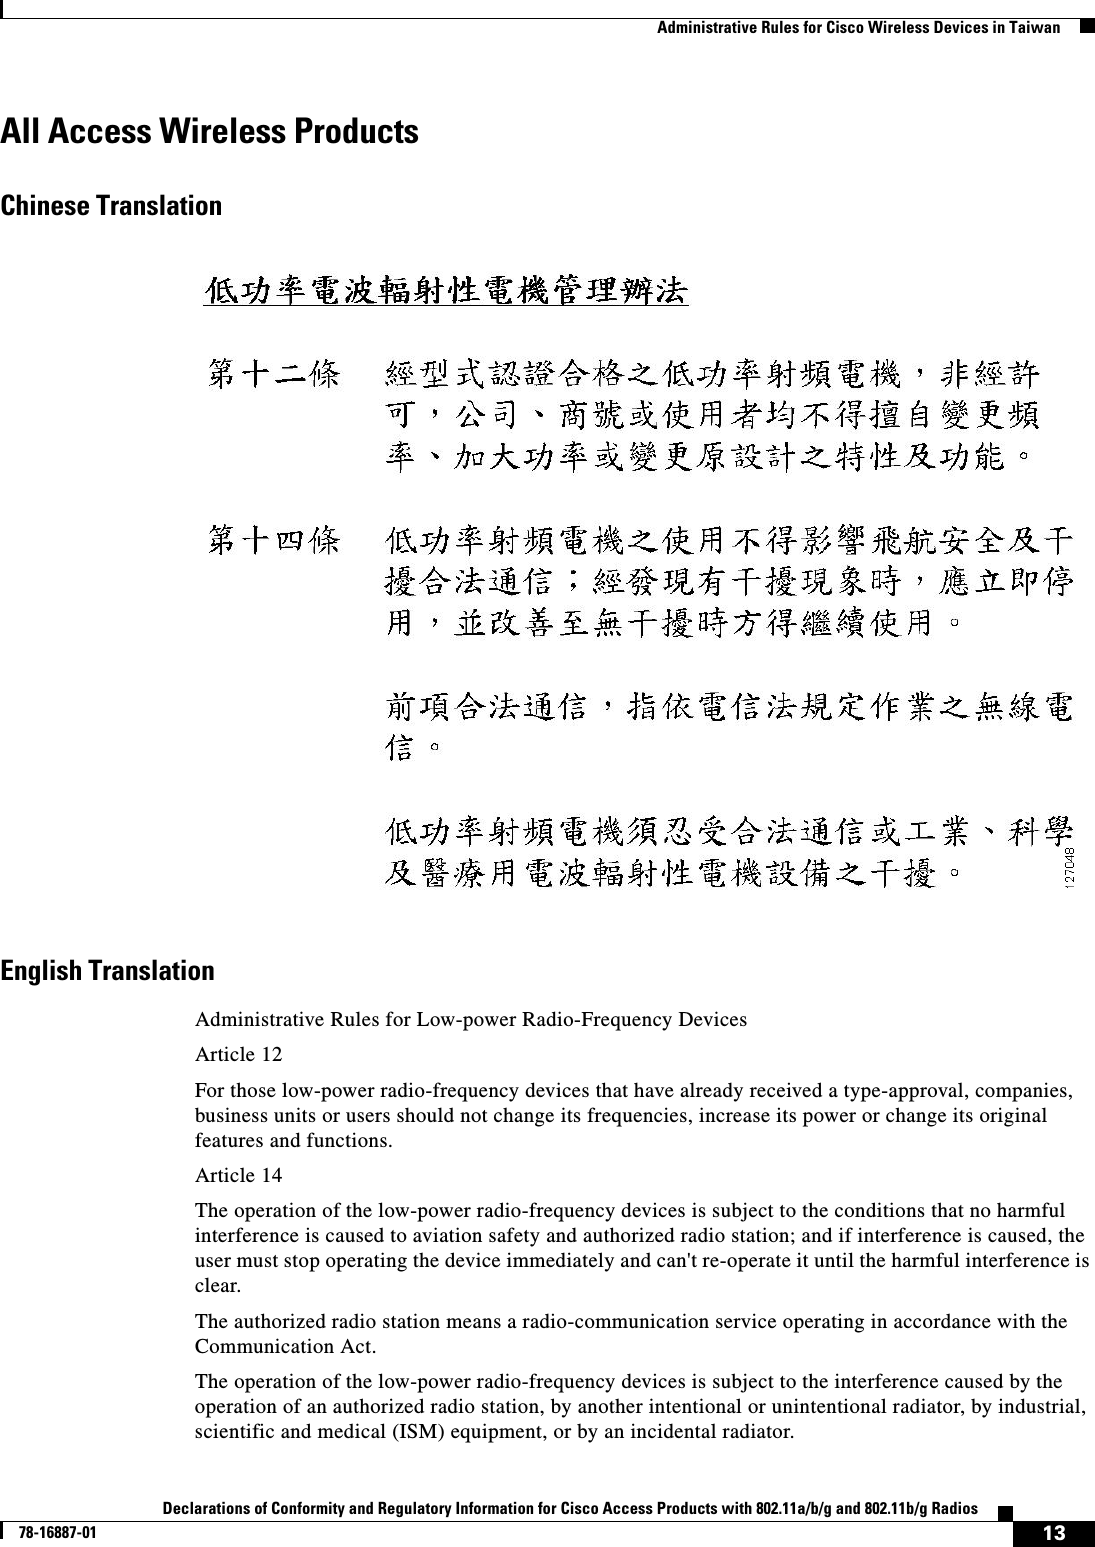  13Declarations of Conformity and Regulatory Information for Cisco Access Products with 802.11a/b/g and 802.11b/g Radios78-16887-01   Administrative Rules for Cisco Wireless Devices in TaiwanAll Access Wireless ProductsChinese TranslationEnglish TranslationAdministrative Rules for Low-power Radio-Frequency DevicesArticle 12For those low-power radio-frequency devices that have already received a type-approval, companies, business units or users should not change its frequencies, increase its power or change its original features and functions.Article 14The operation of the low-power radio-frequency devices is subject to the conditions that no harmful interference is caused to aviation safety and authorized radio station; and if interference is caused, the user must stop operating the device immediately and can&apos;t re-operate it until the harmful interference is clear.The authorized radio station means a radio-communication service operating in accordance with the Communication Act. The operation of the low-power radio-frequency devices is subject to the interference caused by the operation of an authorized radio station, by another intentional or unintentional radiator, by industrial, scientific and medical (ISM) equipment, or by an incidental radiator. 